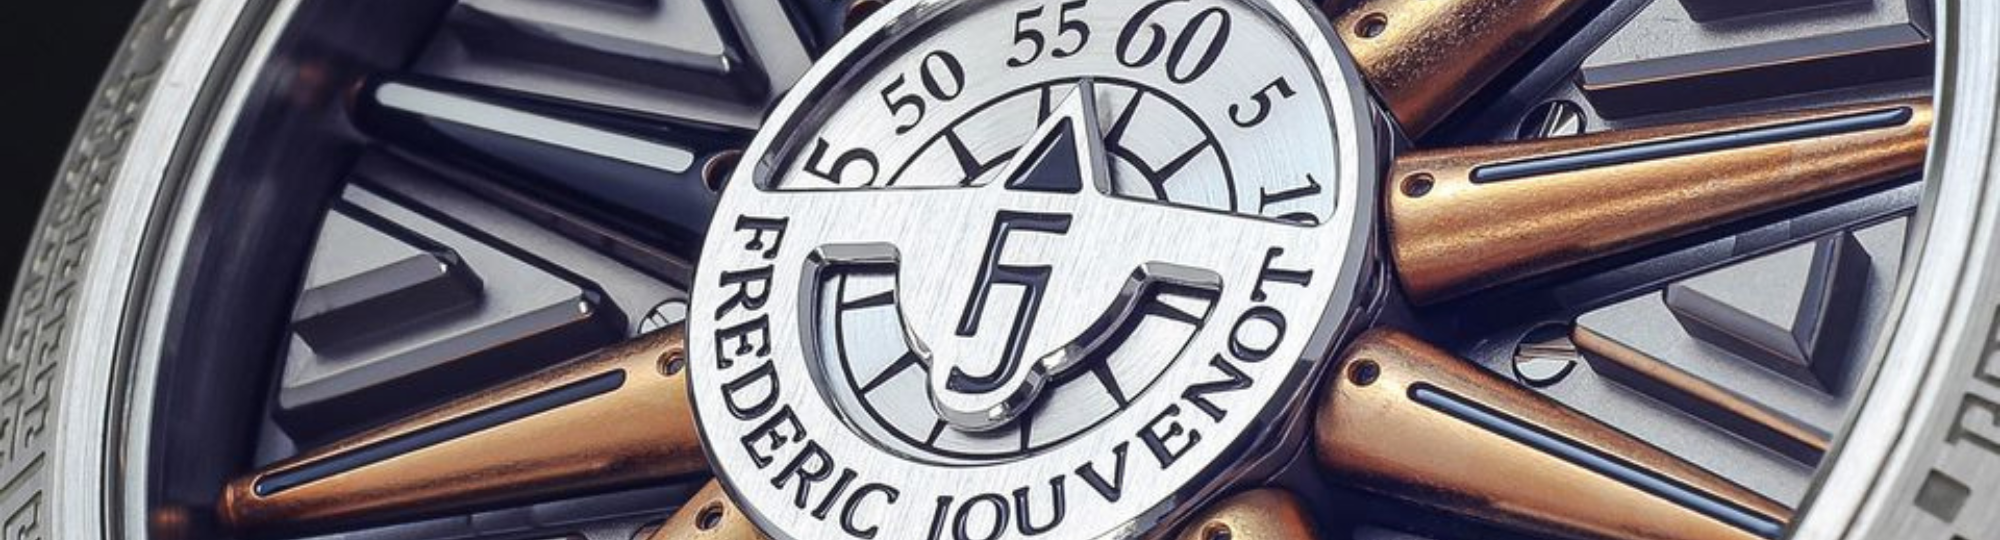 Frederic Jouvenot Watches